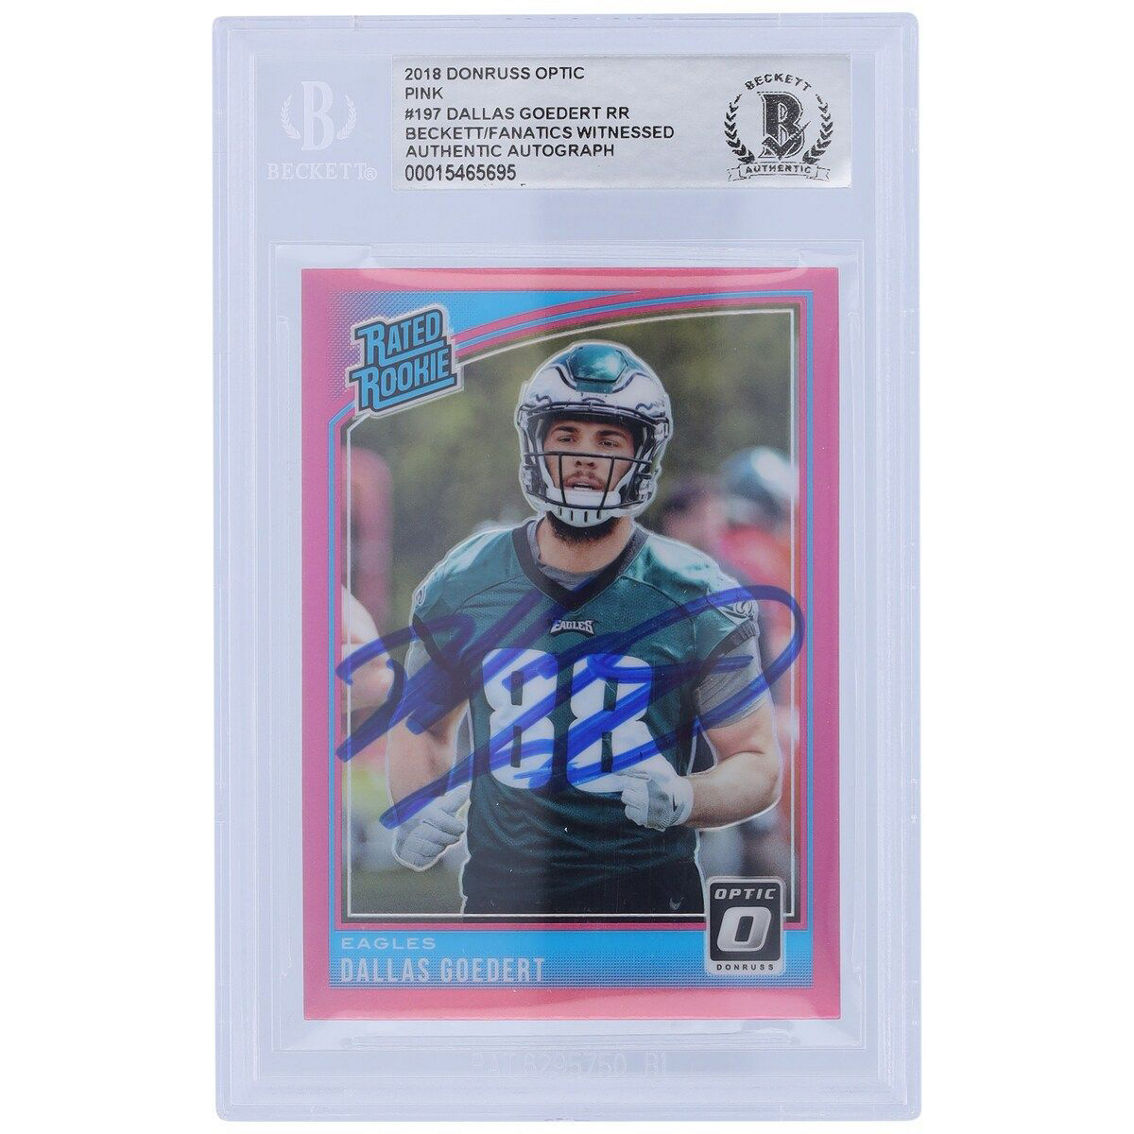 Panini Dallas Goedert Philadelphia Eagles Autographed 2018 Panini Donruss Optic Pink Rated Rookie #197 Beckett Fanatics Witnessed Authenticated Rookie Card - Image 2 of 3